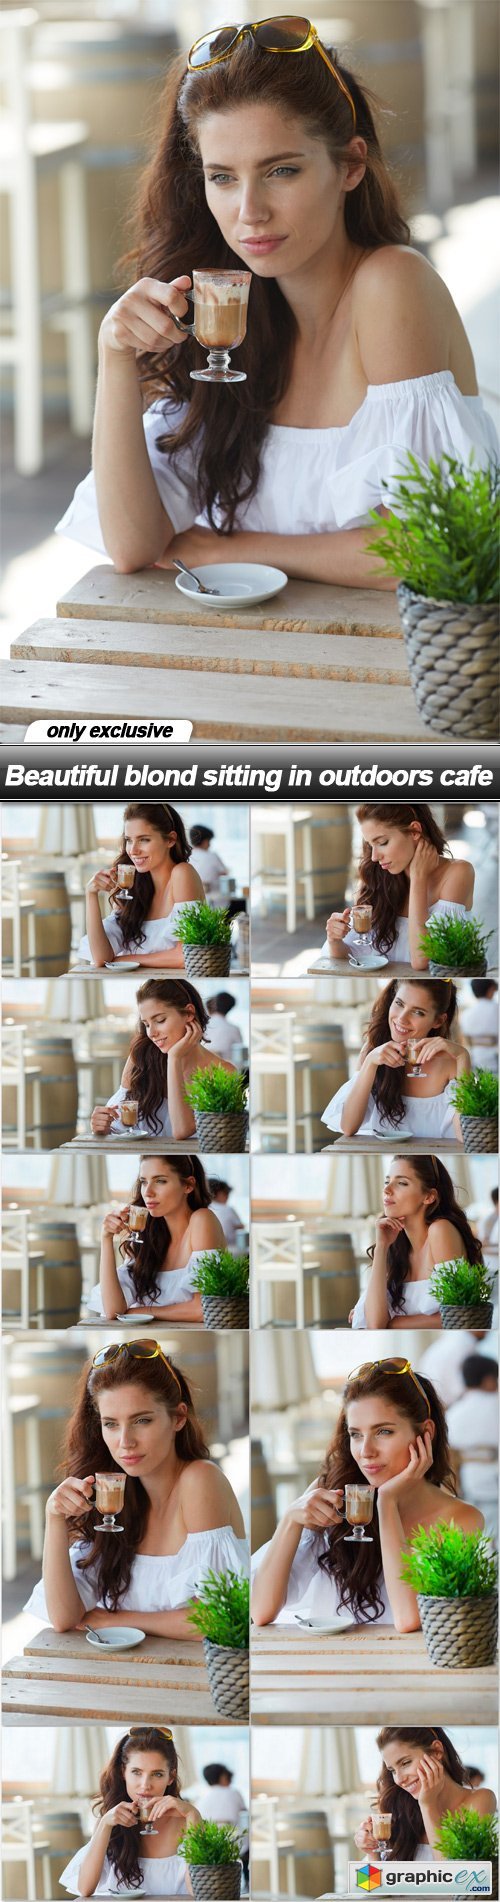 Beautiful blond sitting in outdoors cafe - 10 UHQ JPEG